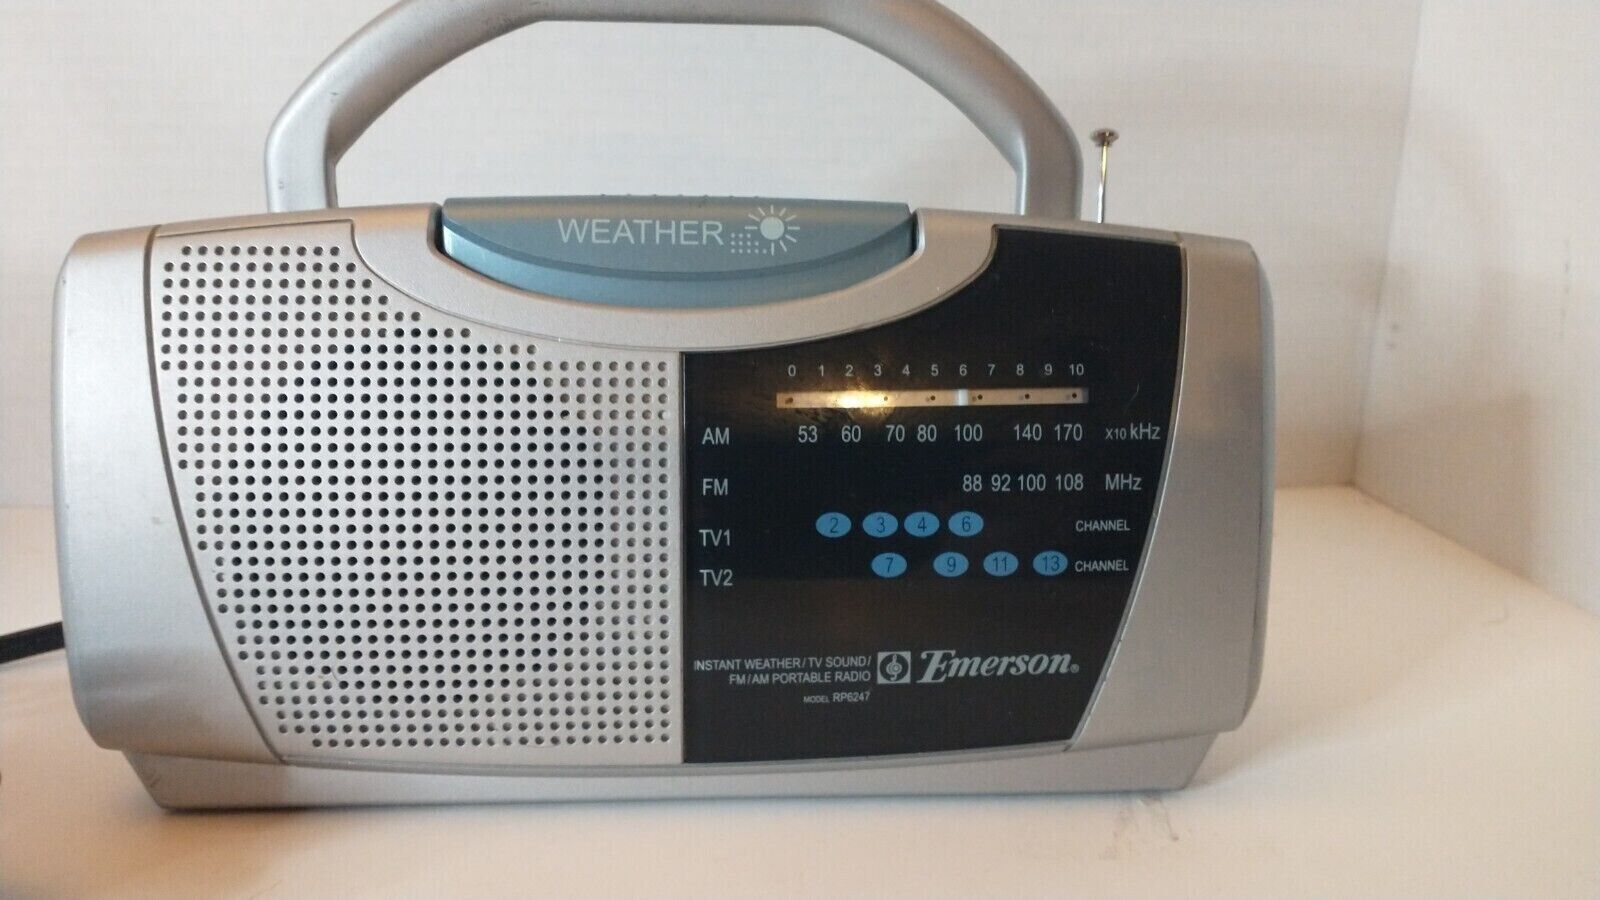 Emerson Weather Radio with Instant Weather / TV Sound / FM / AM Model RP6247S - $13.85